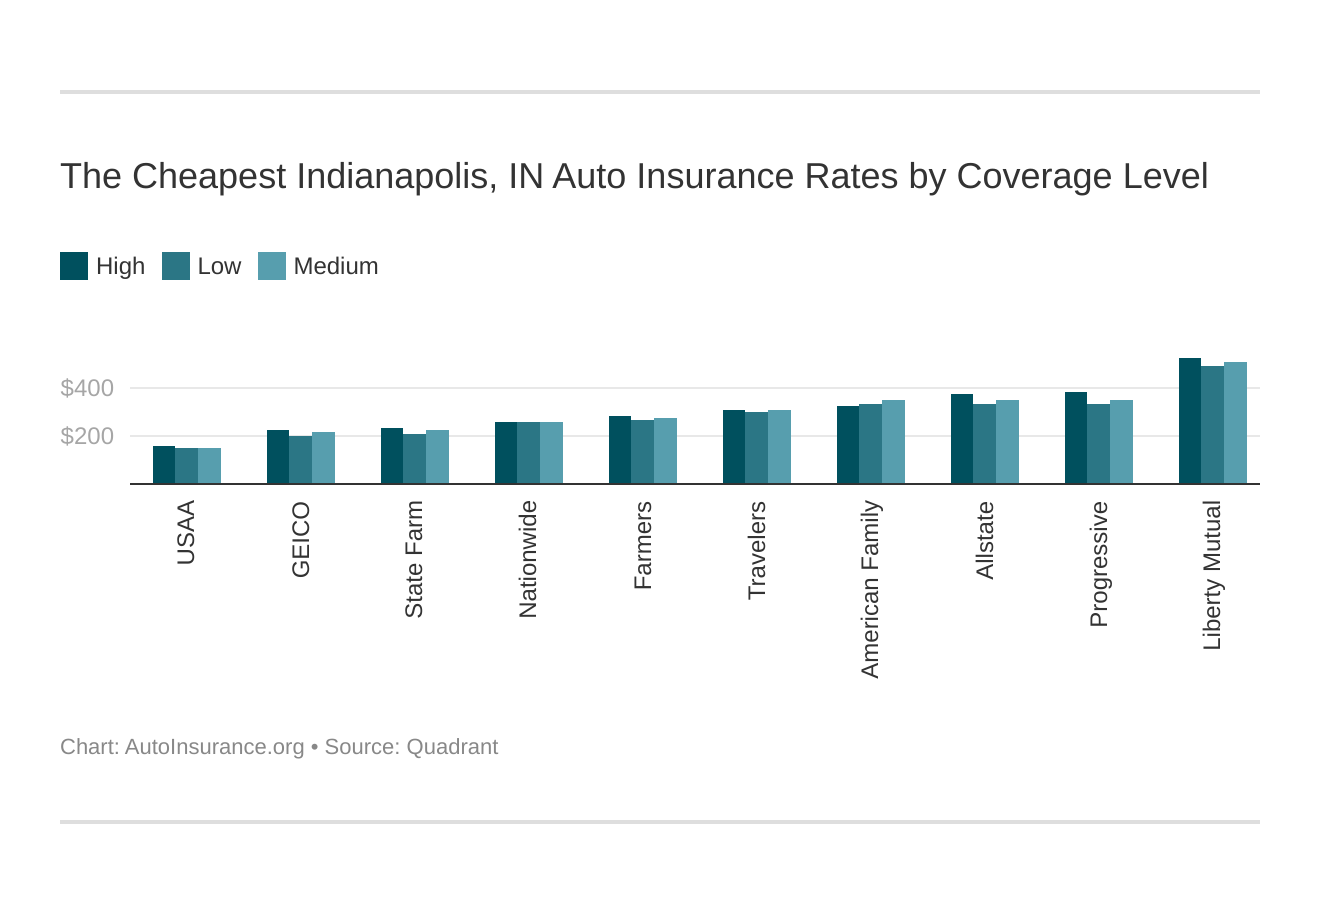 The Cheapest Indianapolis, IN Auto Insurance Rates by Coverage Level